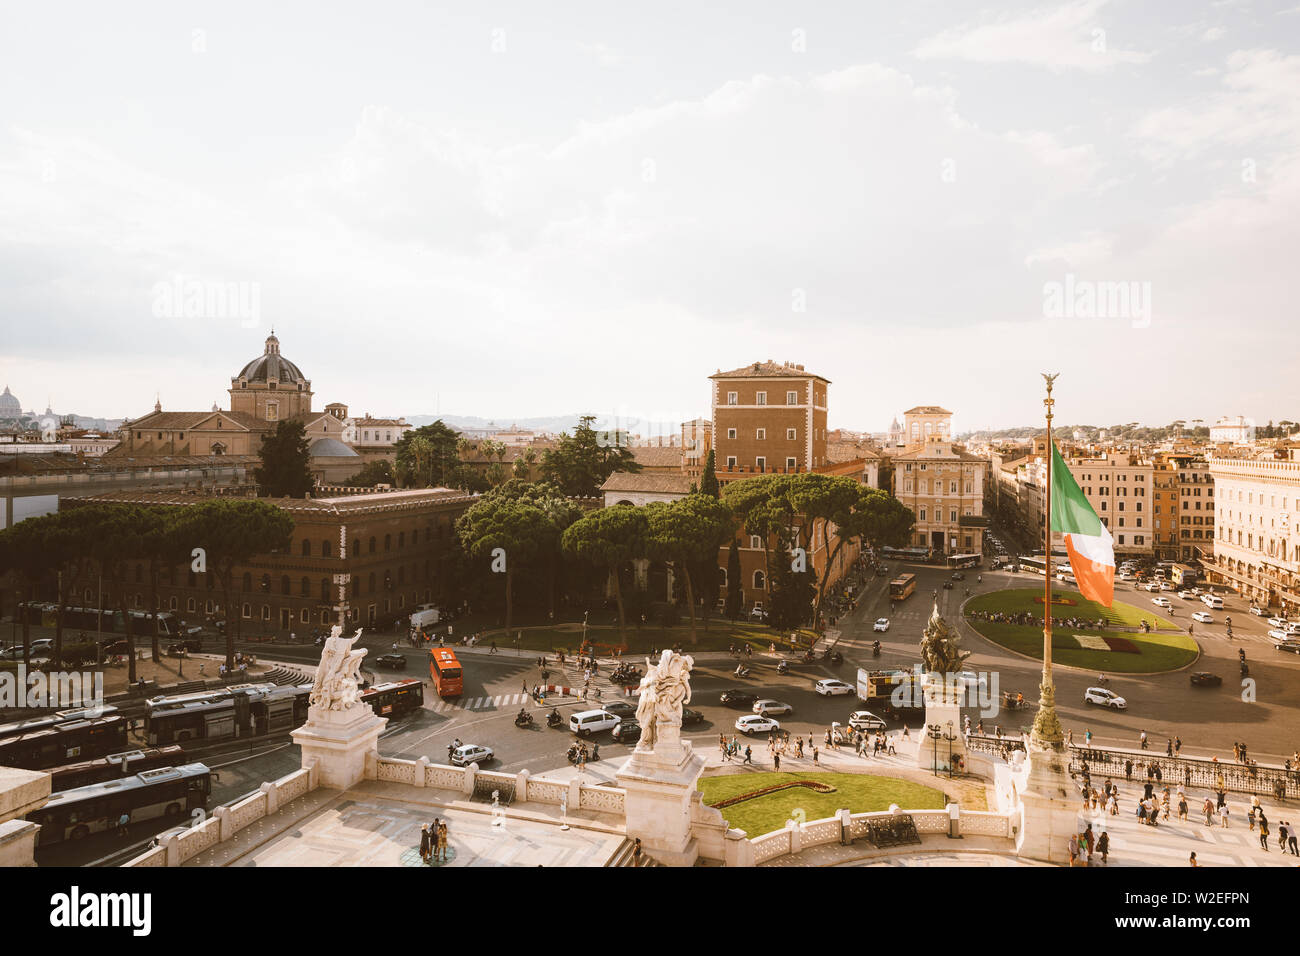 Rome, Italy - June 19, 2018: Panoramic view of Piazza Venezia and city from Vittorio Emanuele II Monument also known as the Vittoriano in Rome. Traffi Stock Photo